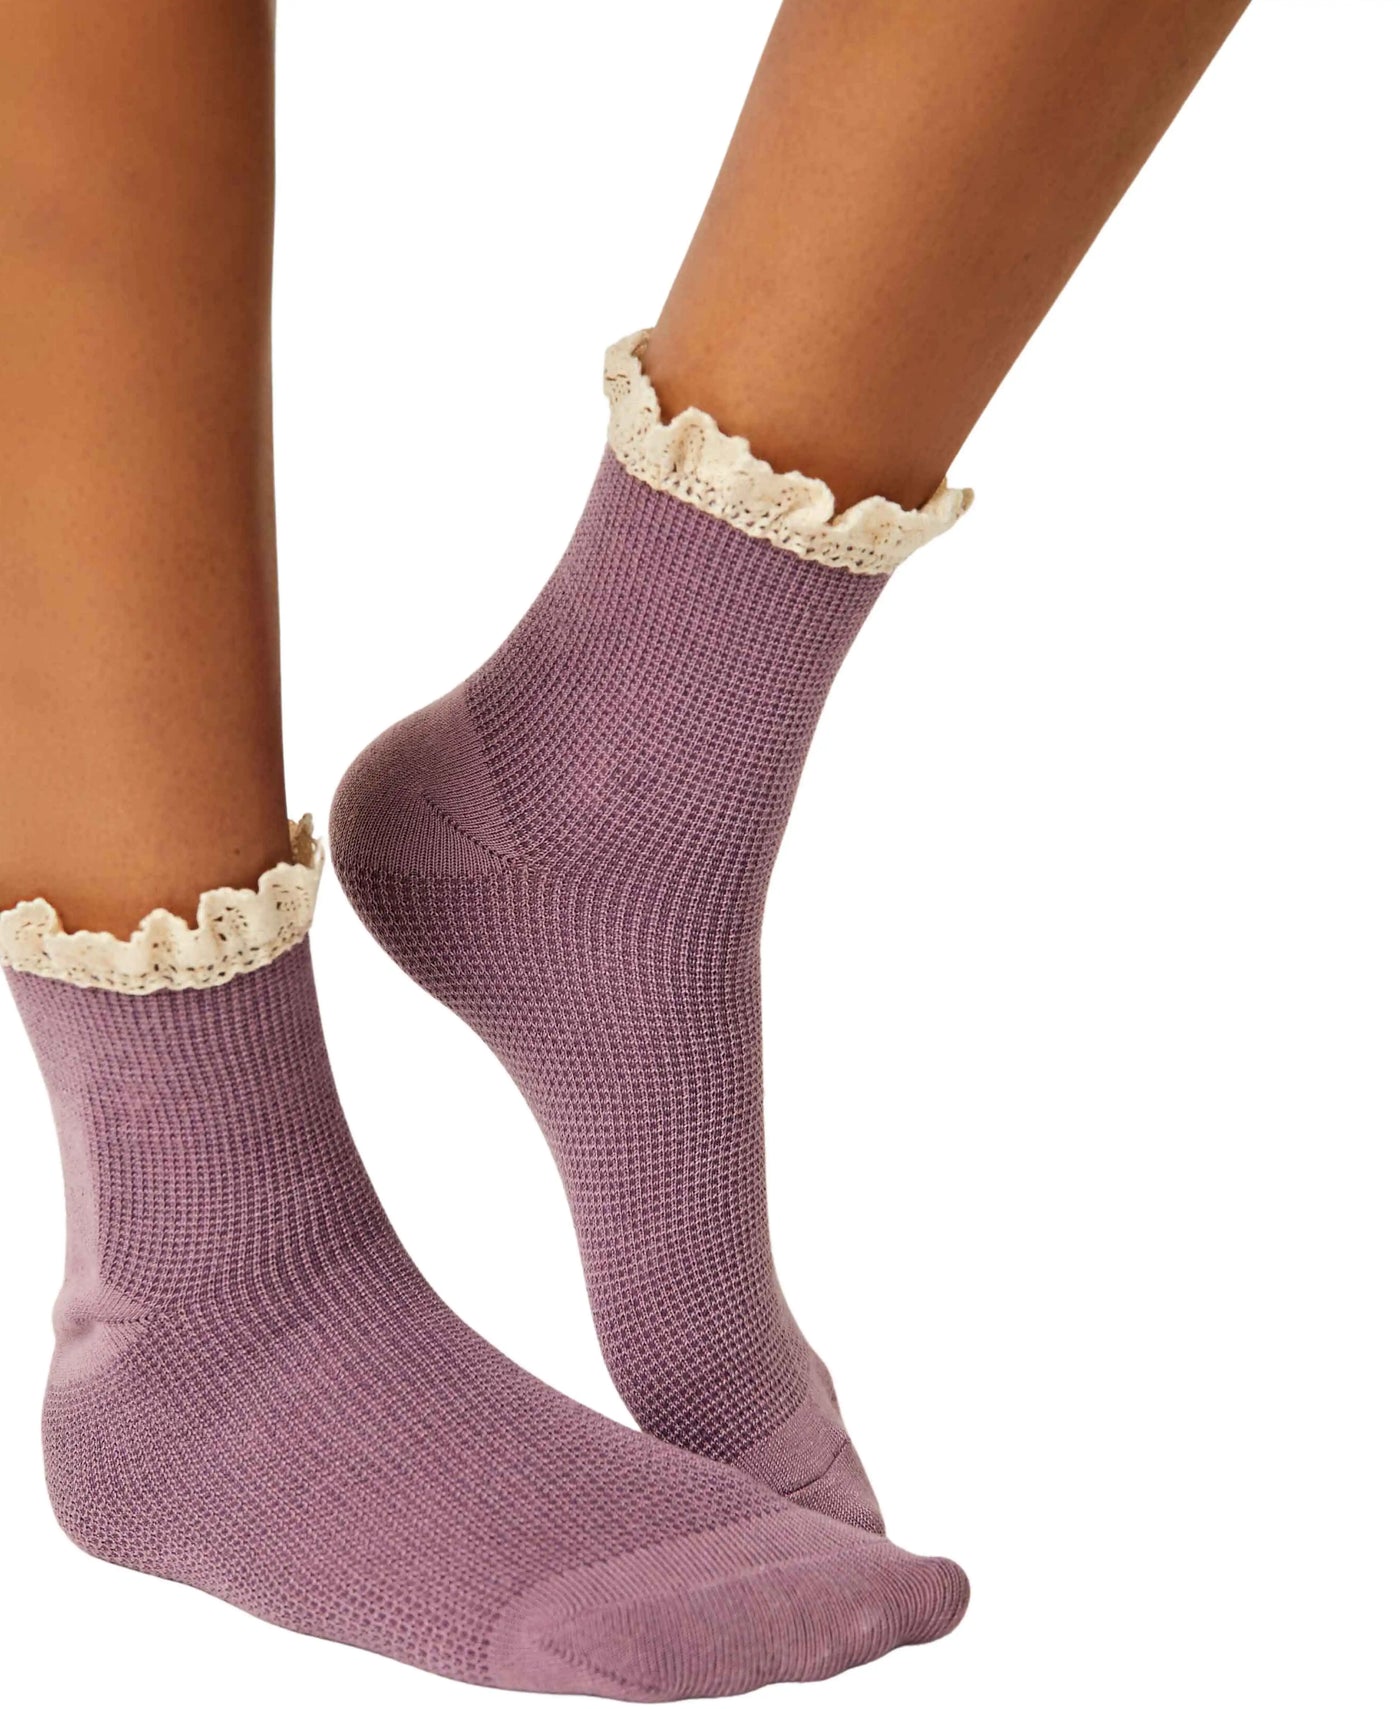 Waffle Knit Ankle Socks in Plum - Madison's Niche 